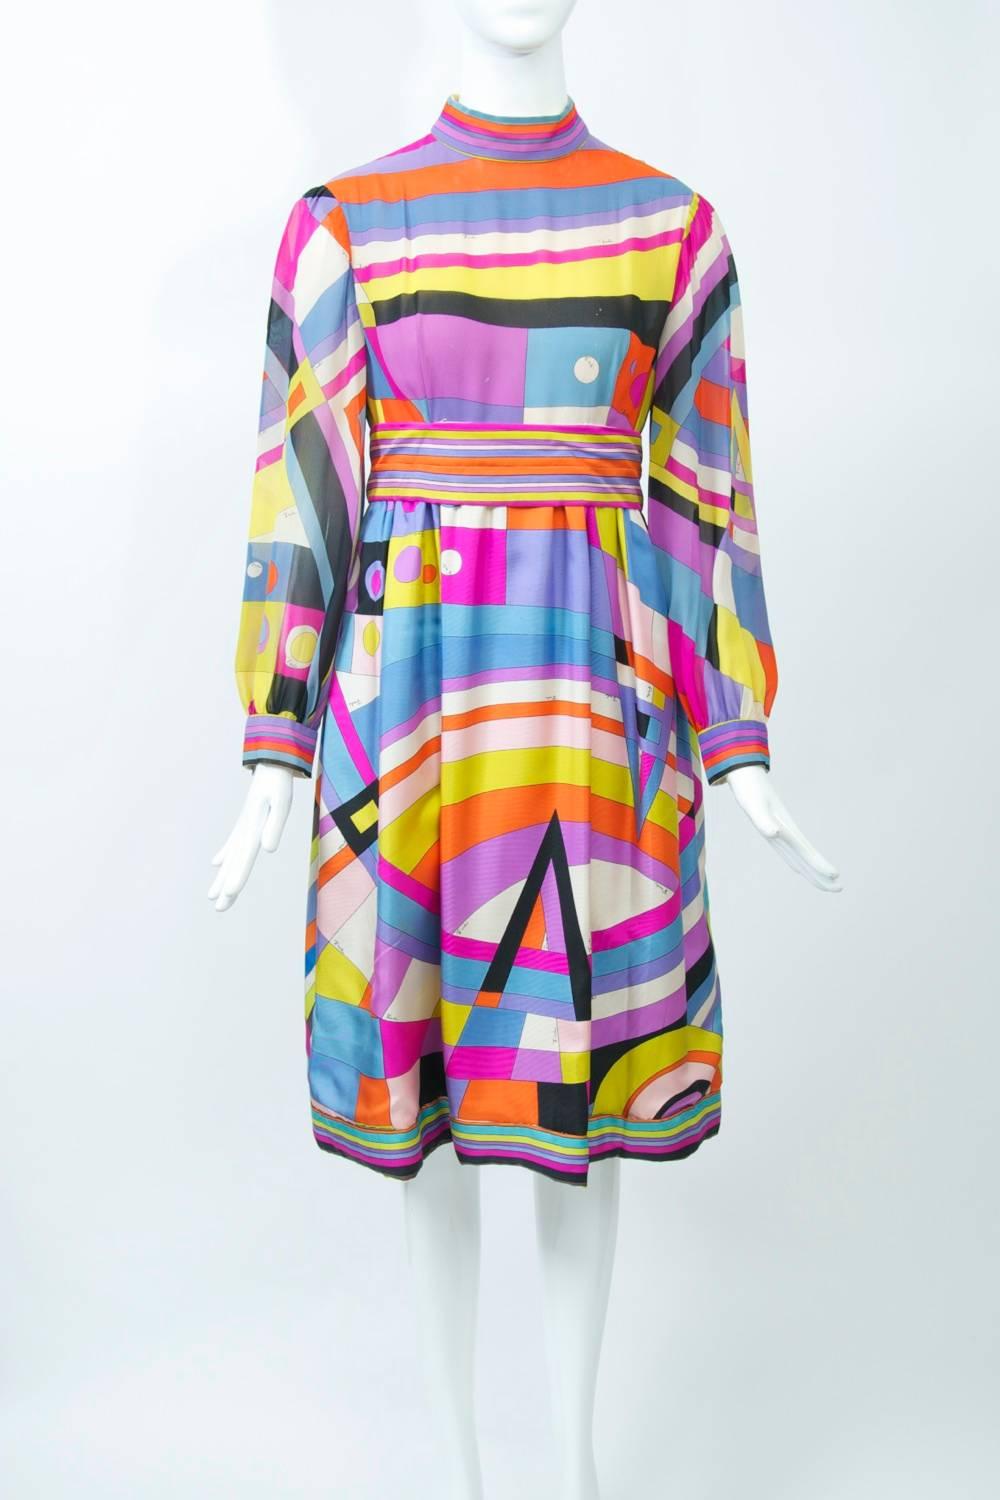 Pucci vivid geometric print dress, the bodice of silk chiffon, the skirt of regular silk in blues, purples, fuchsia, yellow, orange, white and black. The empire bodice features a mock turtleneck and long full sleeves with border at the snapped cuffs